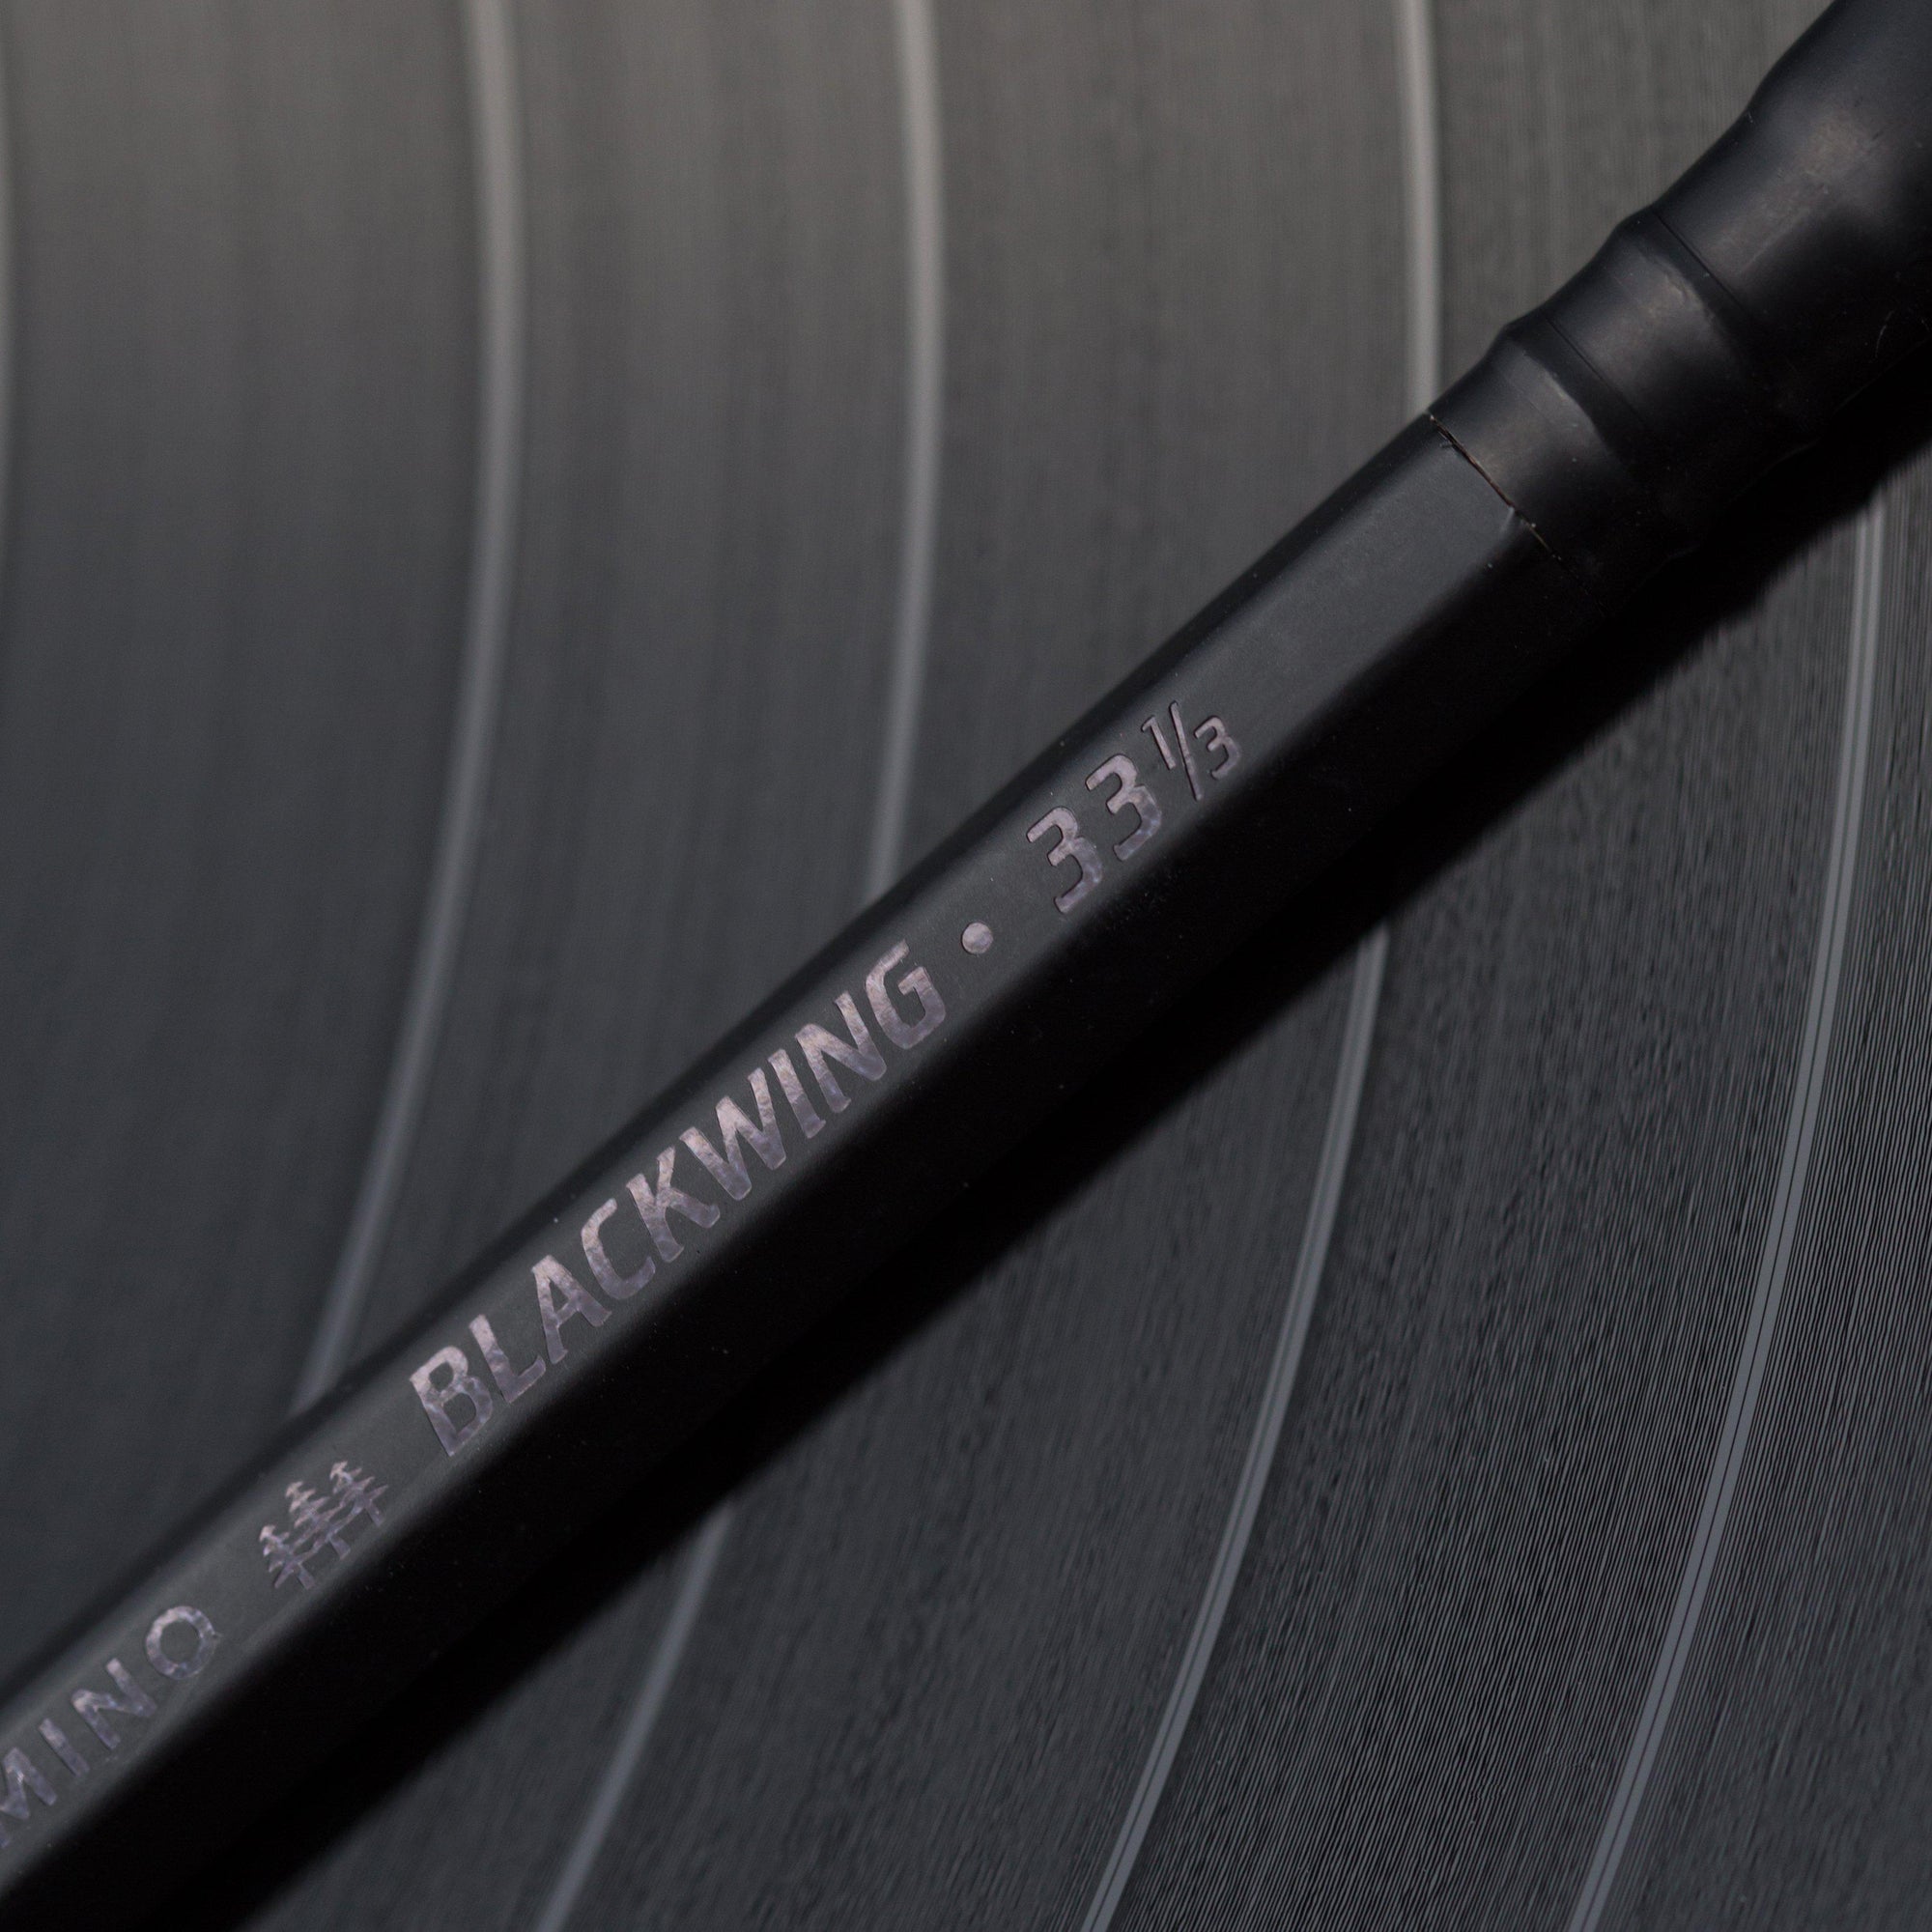 Blackwing Volume 33 1/3: A Tribute to Vinyl Records